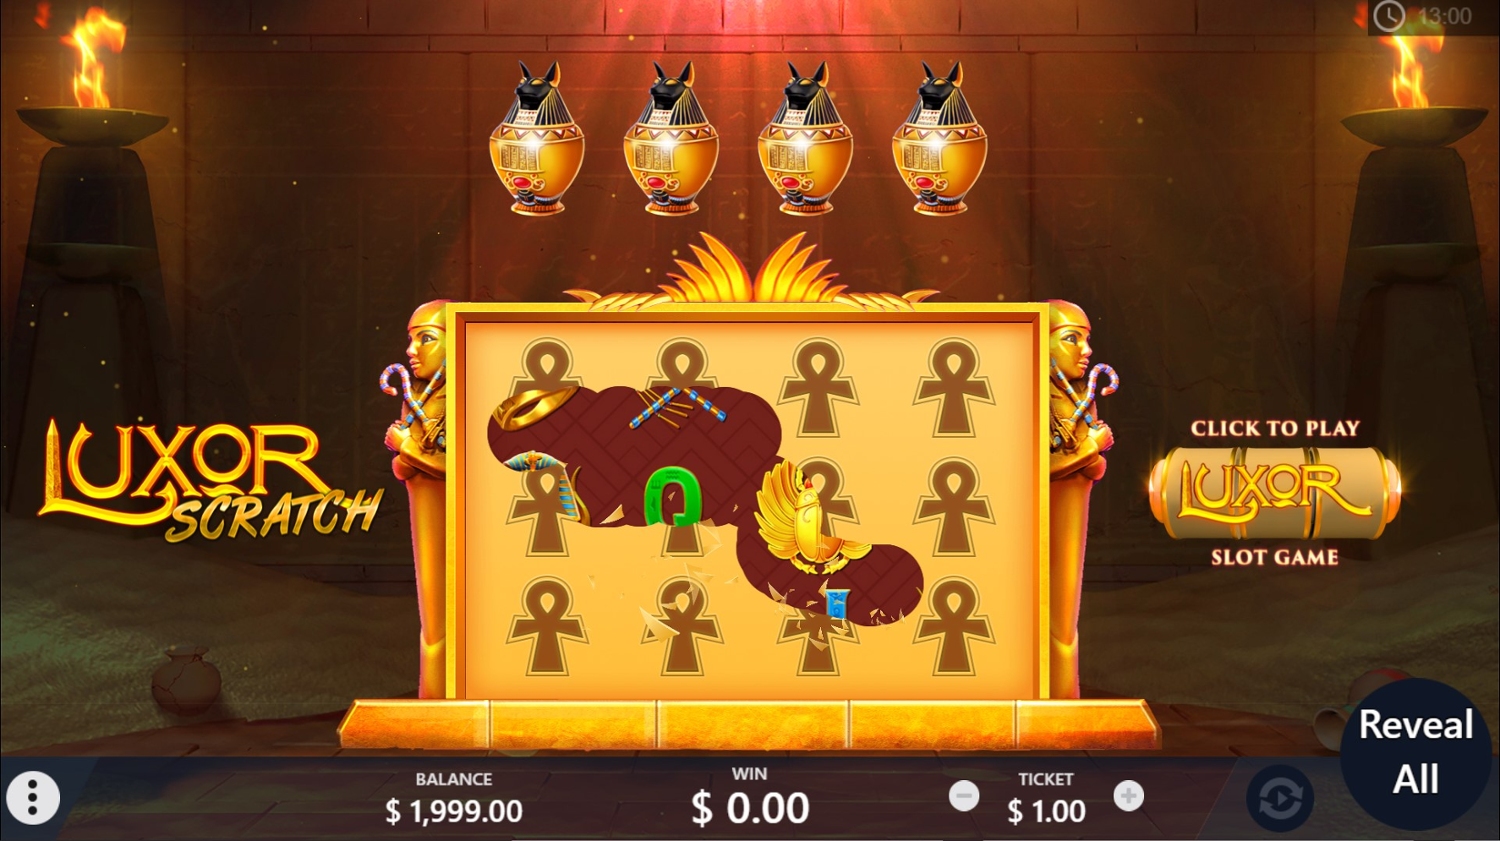 play luxor game free online